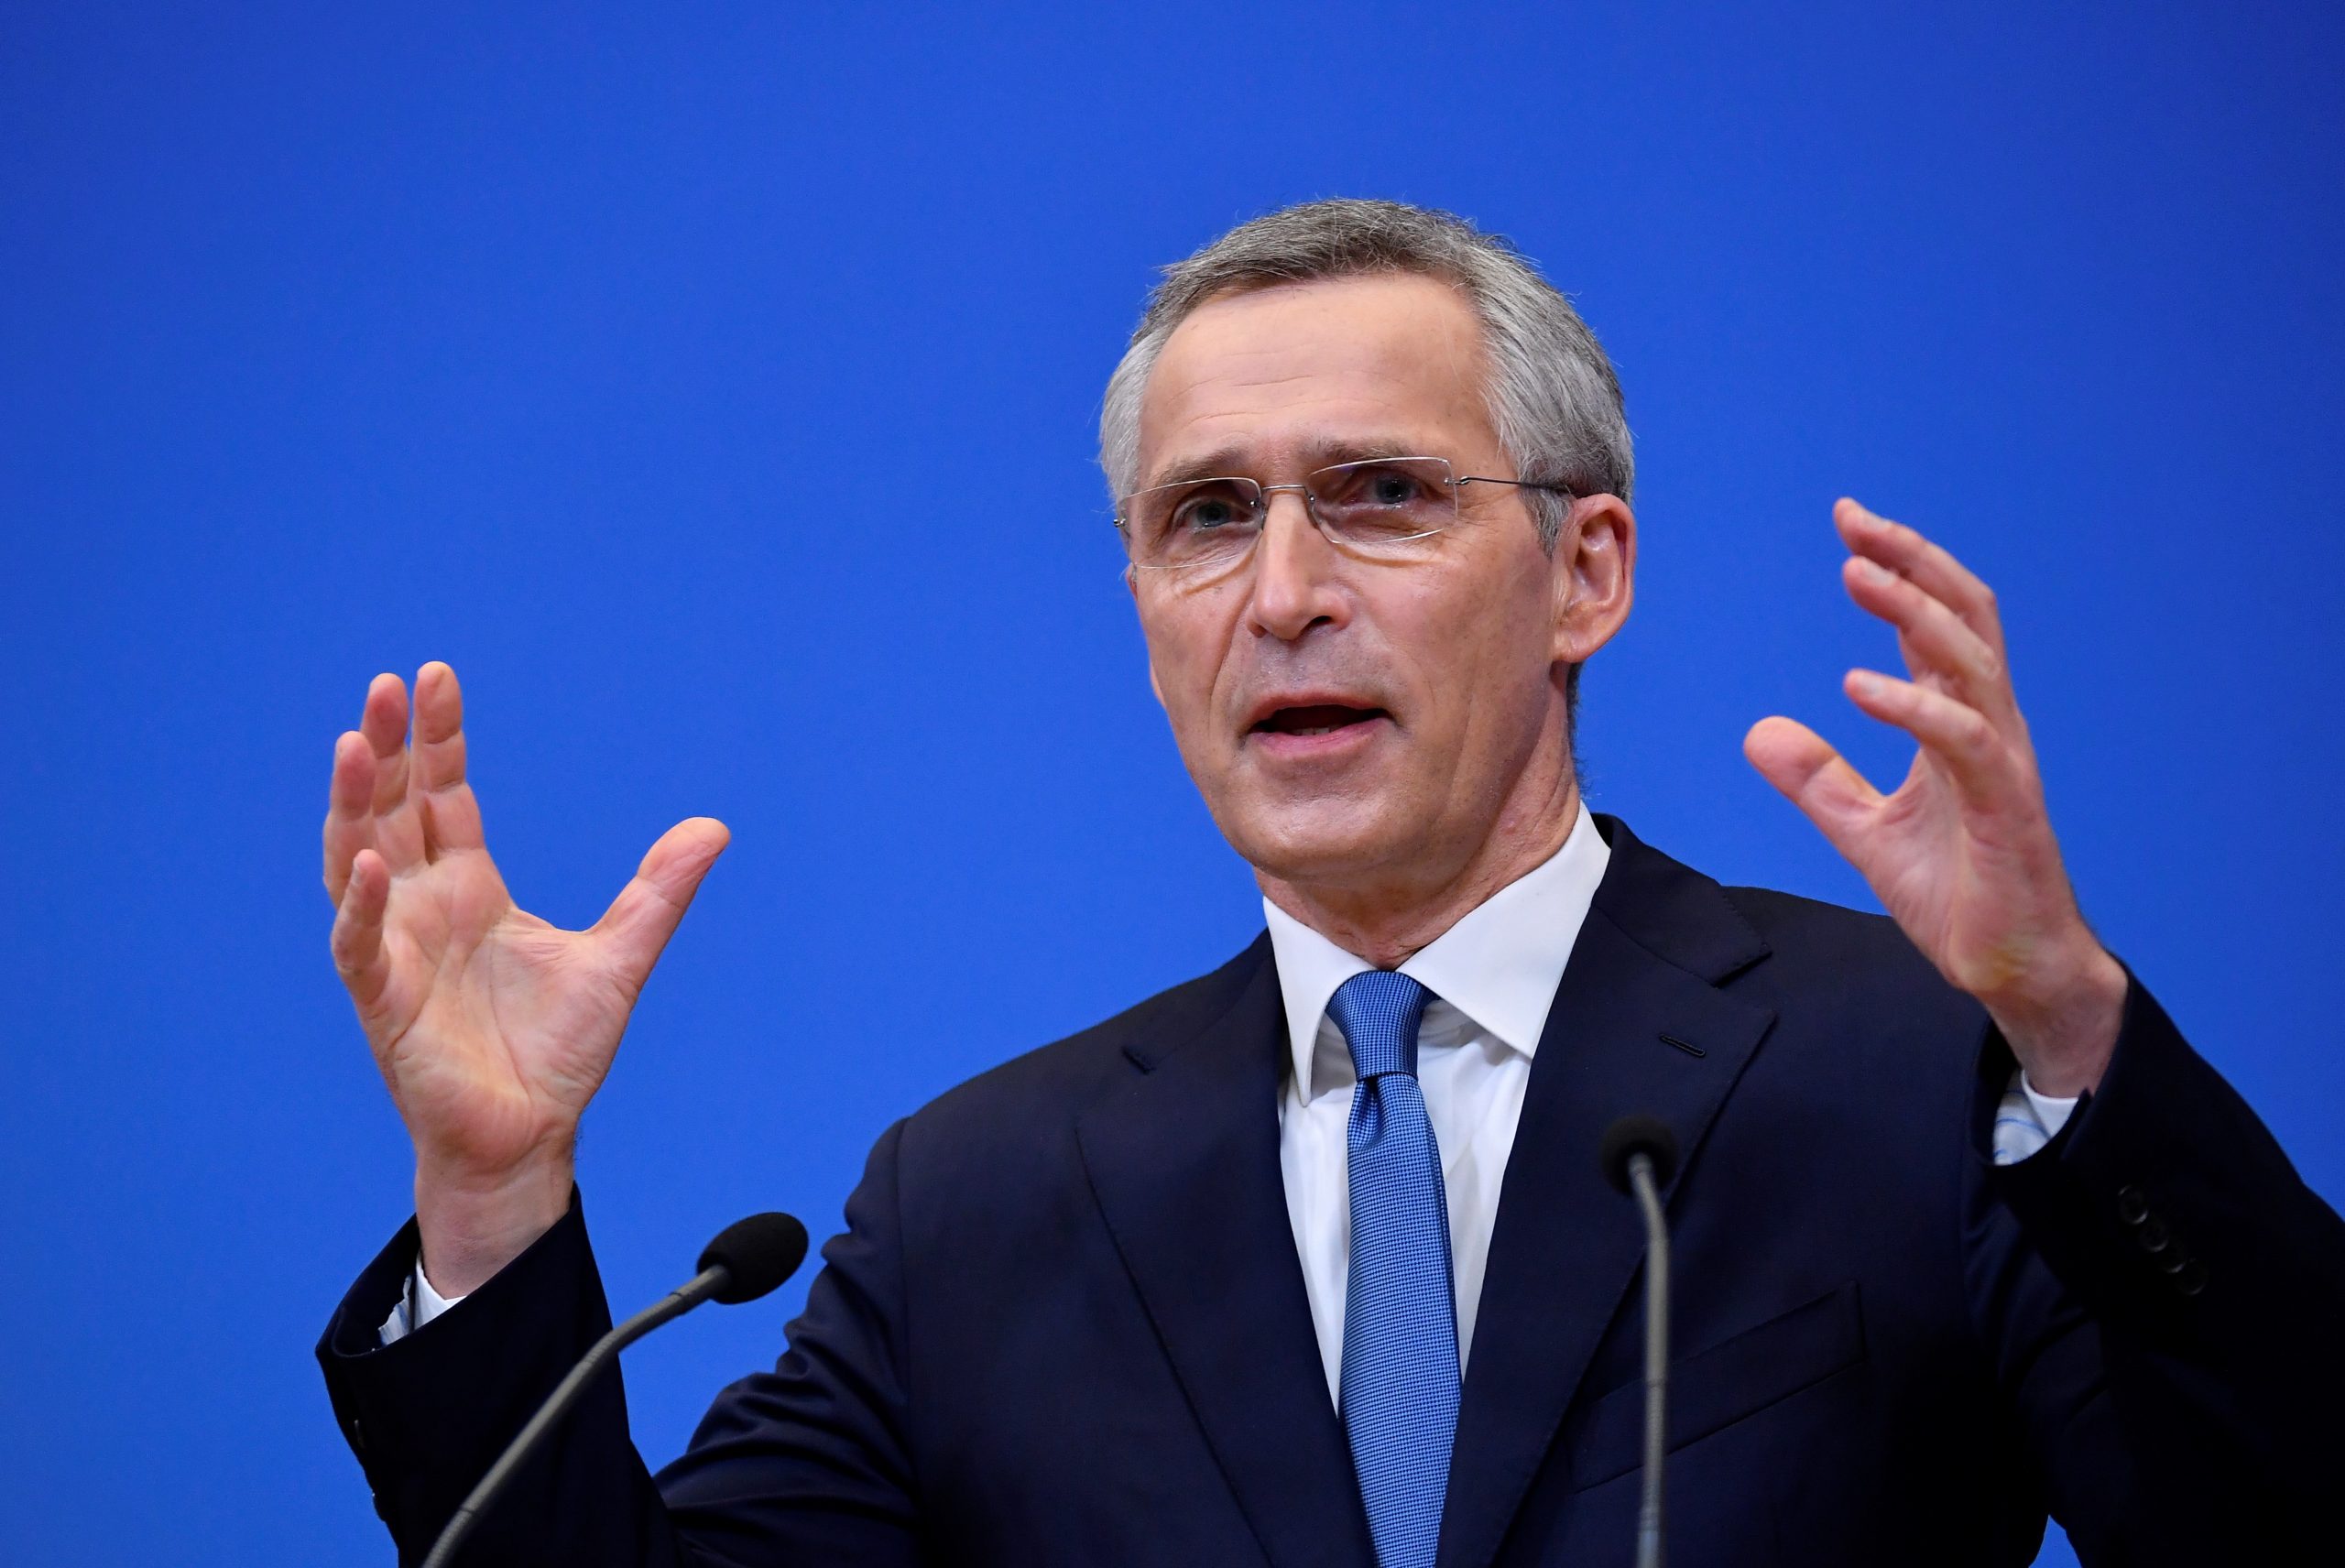 epa09019387 NATO Secretary General Jens Stoltenberg gestures as he addresses a press conference following a virtual meeting of defence ministers at NATO headquarters in Brussels, Belgium, on 17 February 2021.  EPA/JOHN THYS / POOL